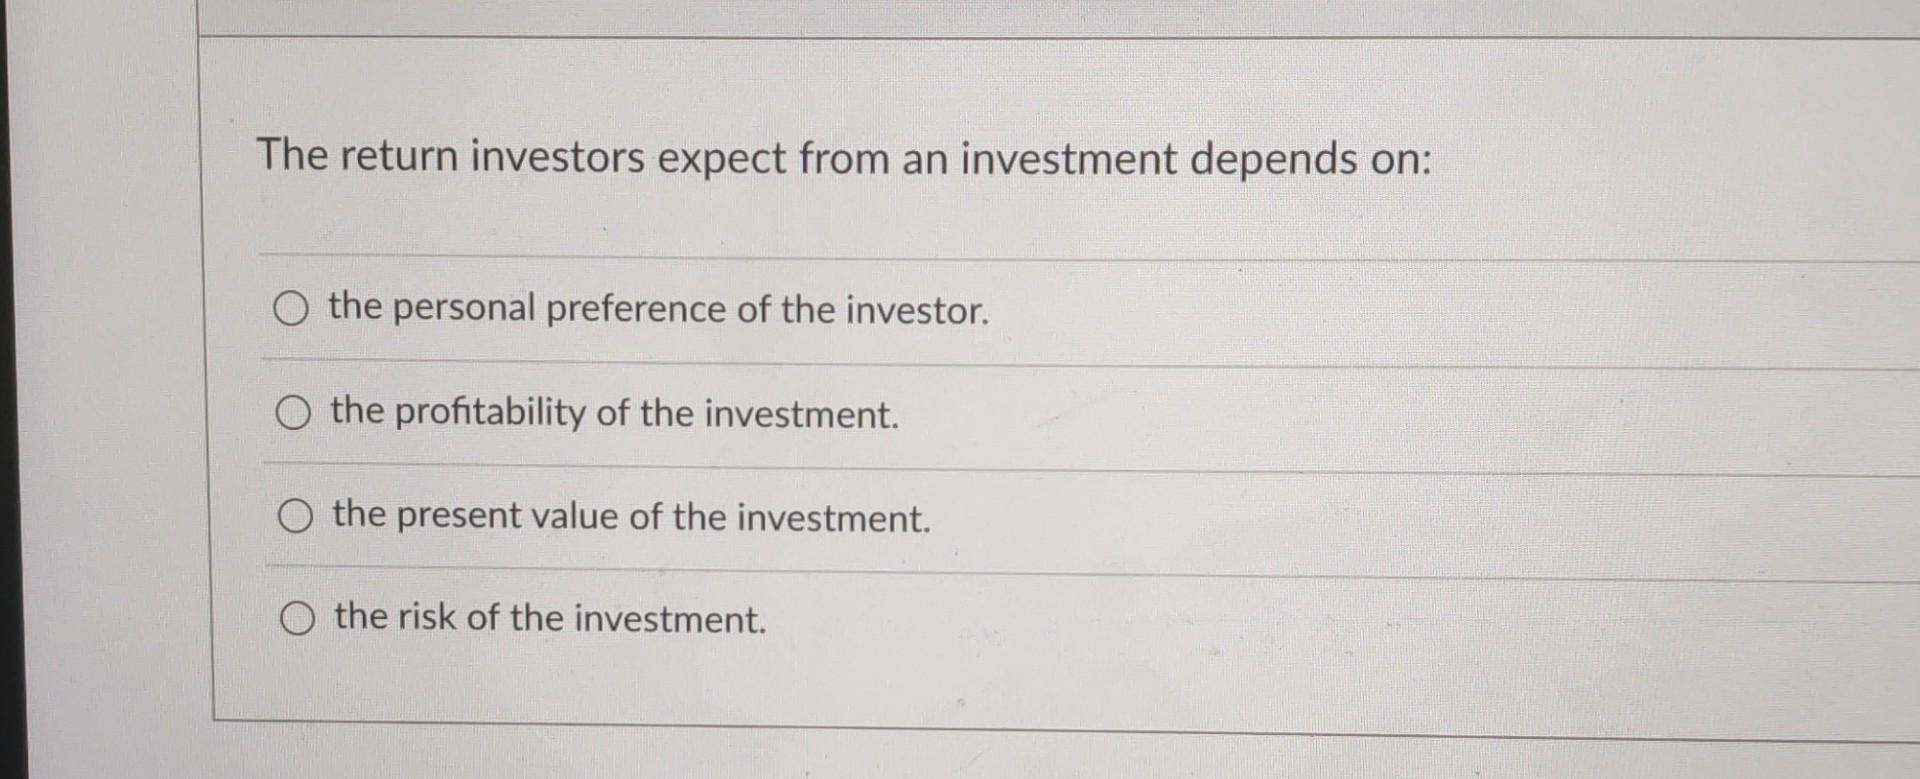 The return investors expect from an investment depends on: O the personal preference of the investor. O the